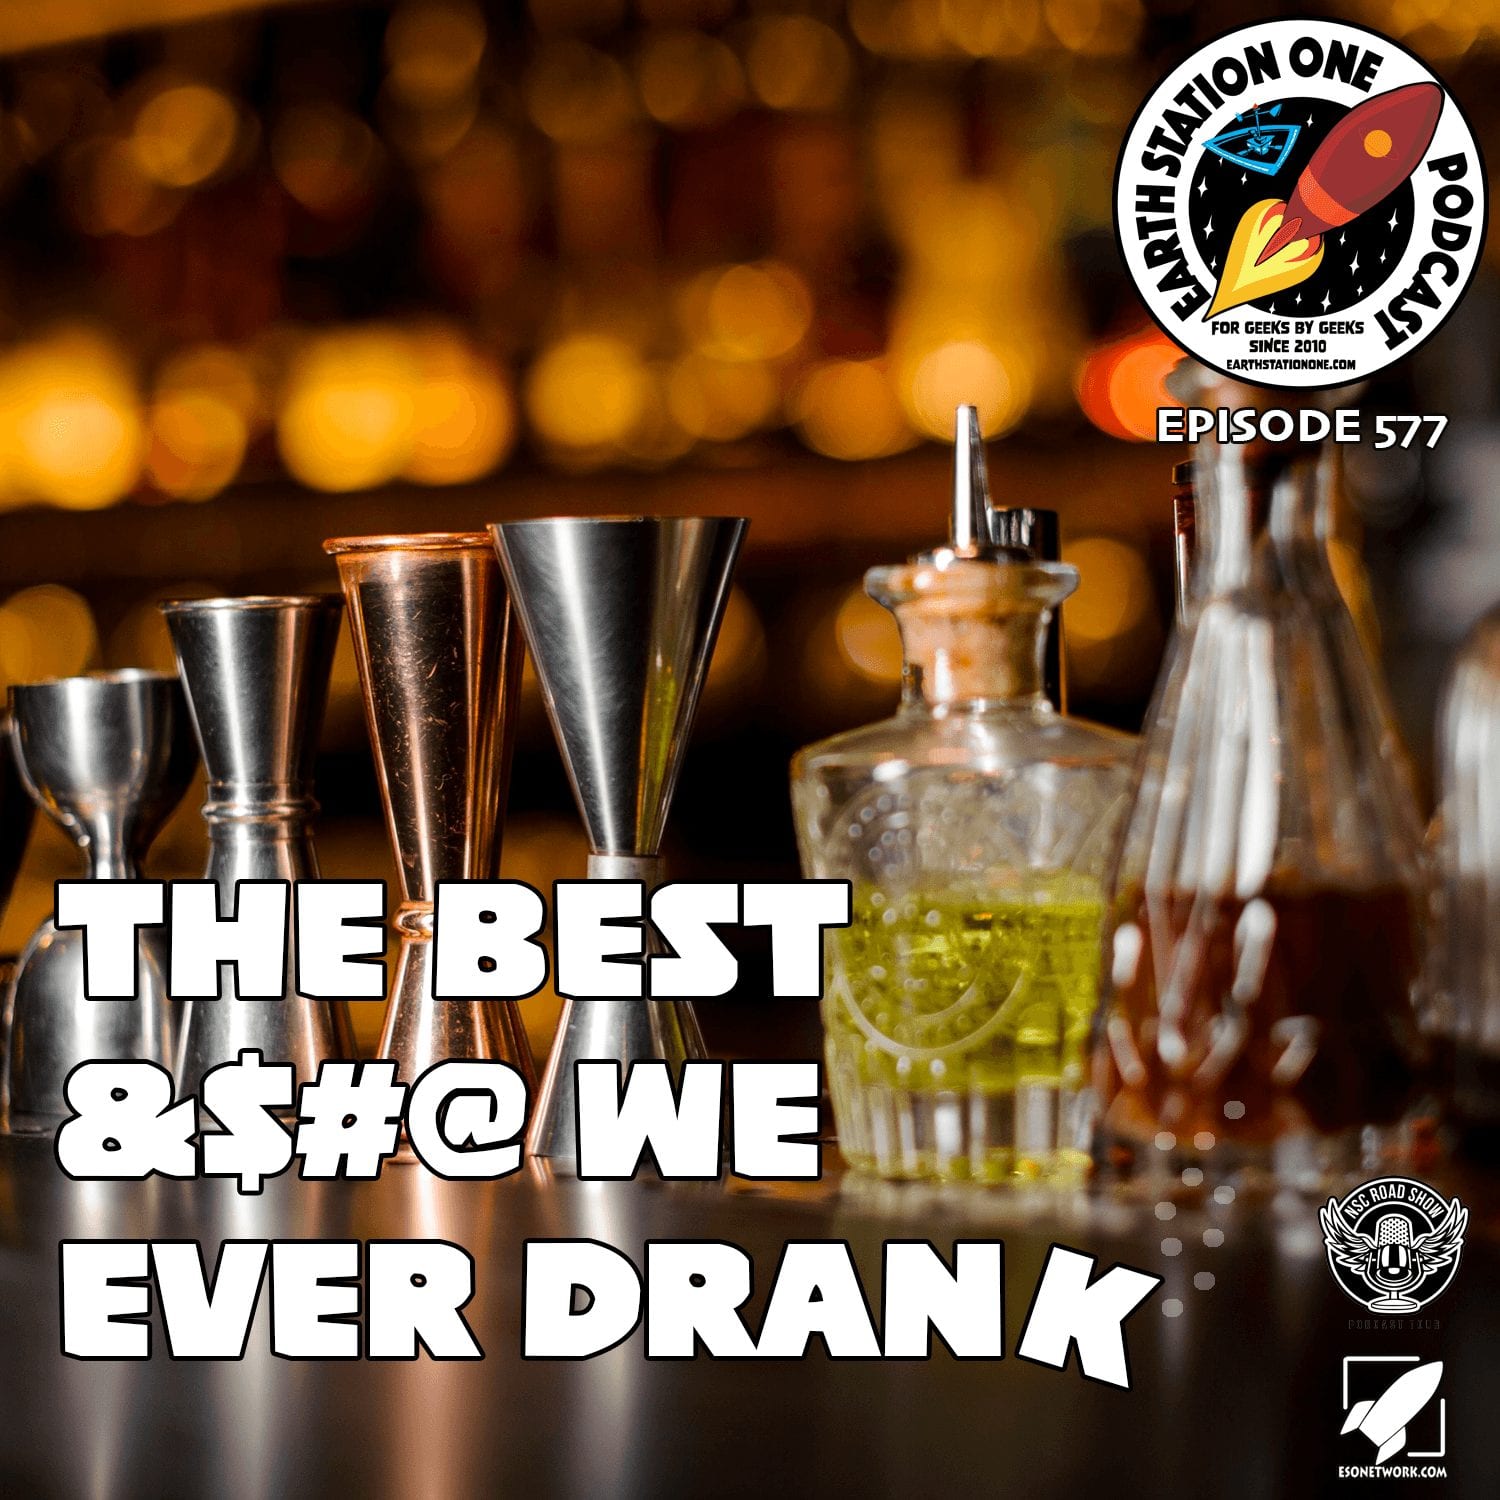 Earth Station One Podcast Ep 577 - The Best &$#@ We Ever Drank